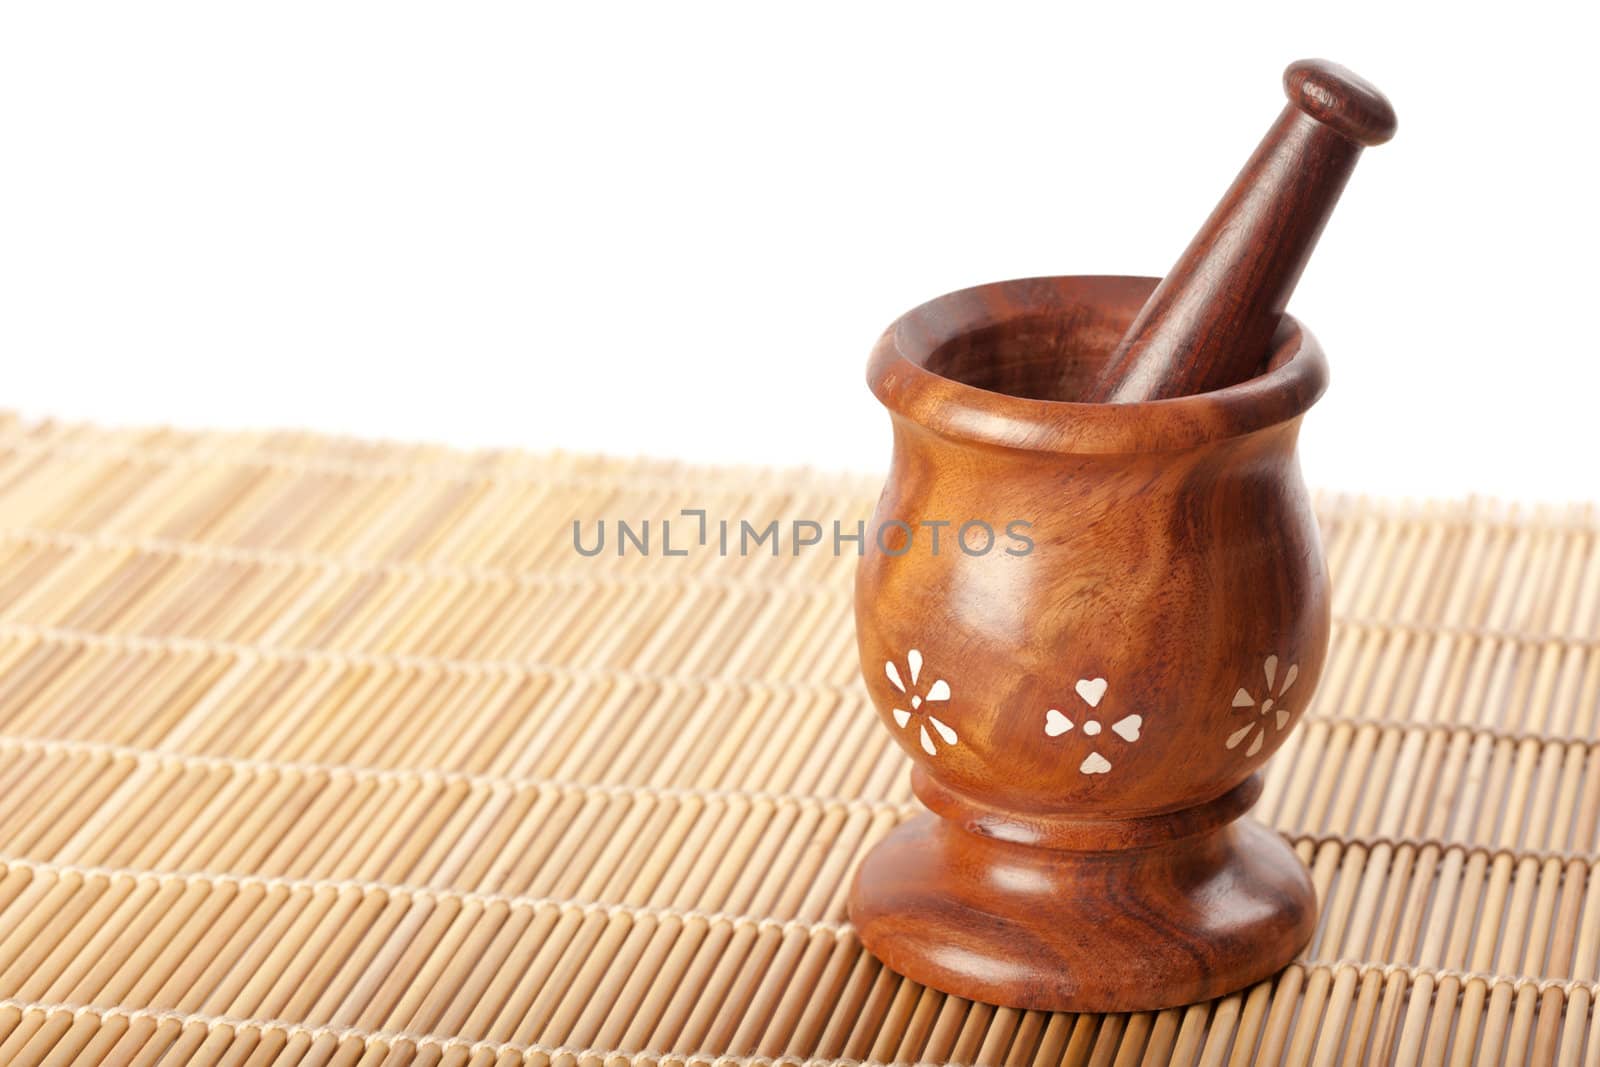 Wooden mortar with pestle by dimol